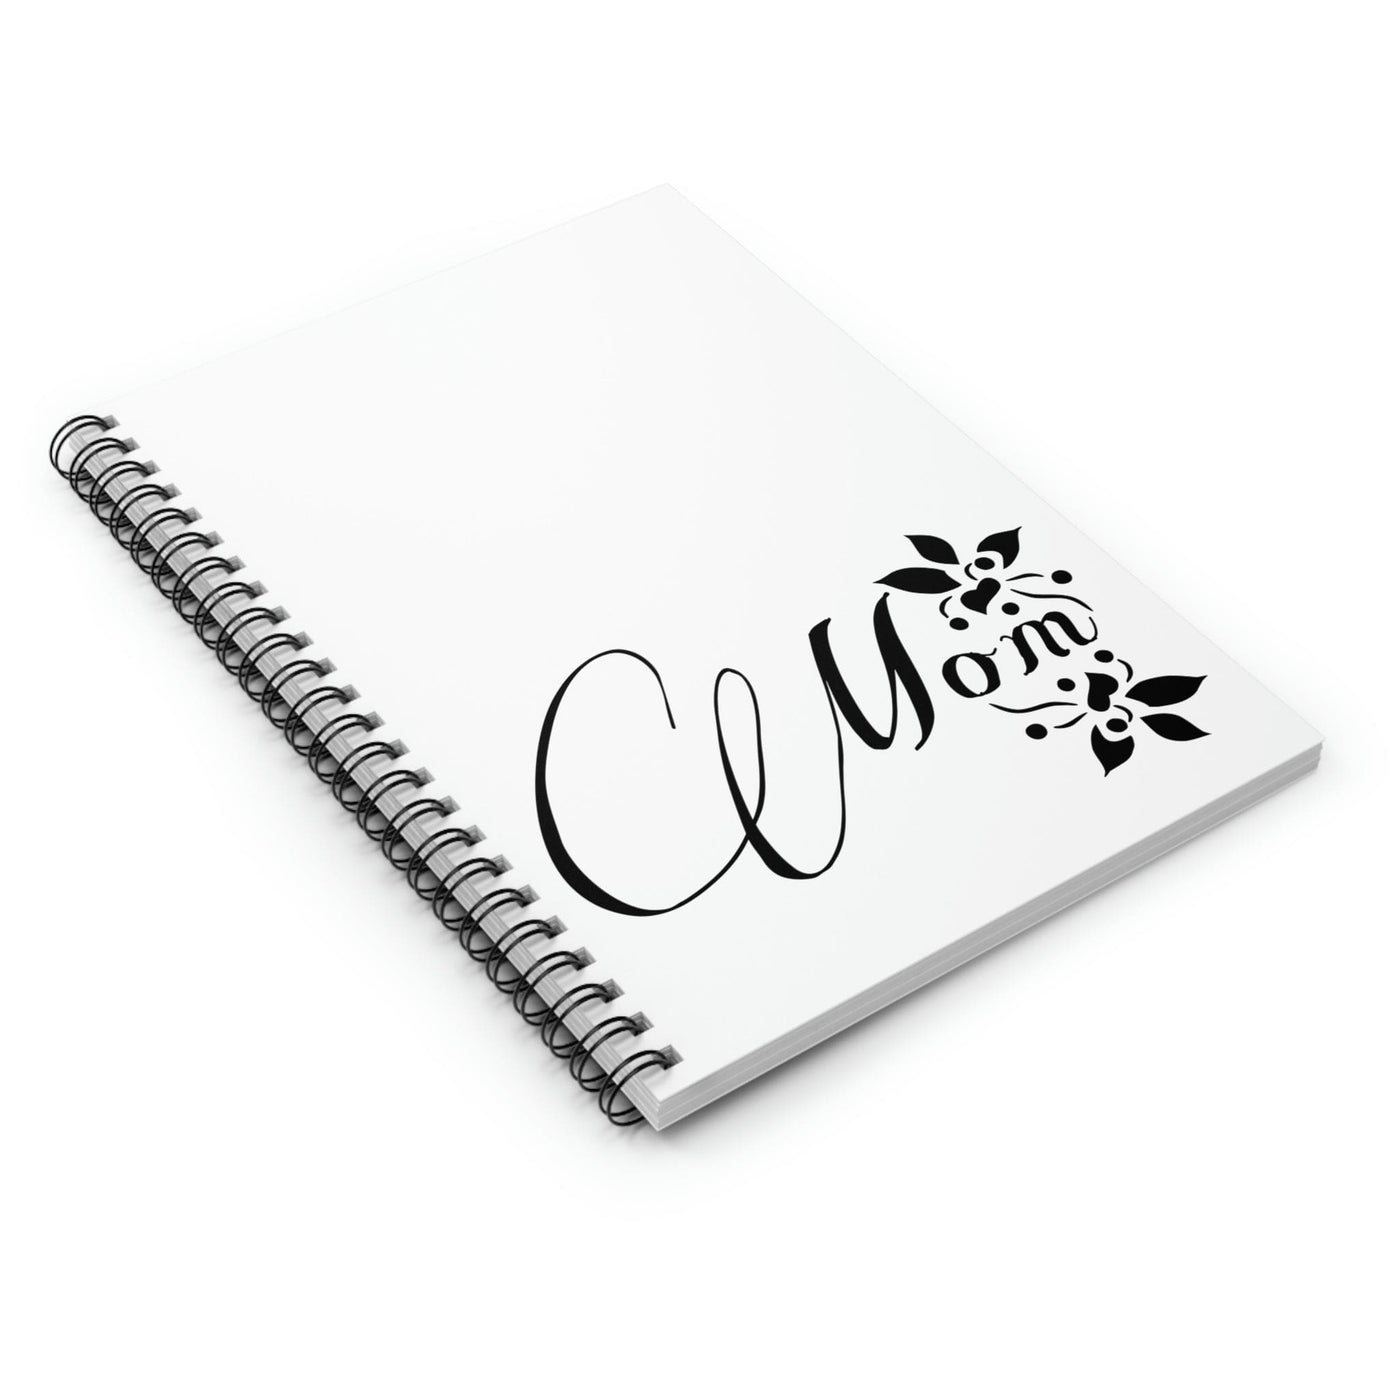 Spiral Notebook - Ruled Line / Mom Graphic - Stationery | Journals | Spiral